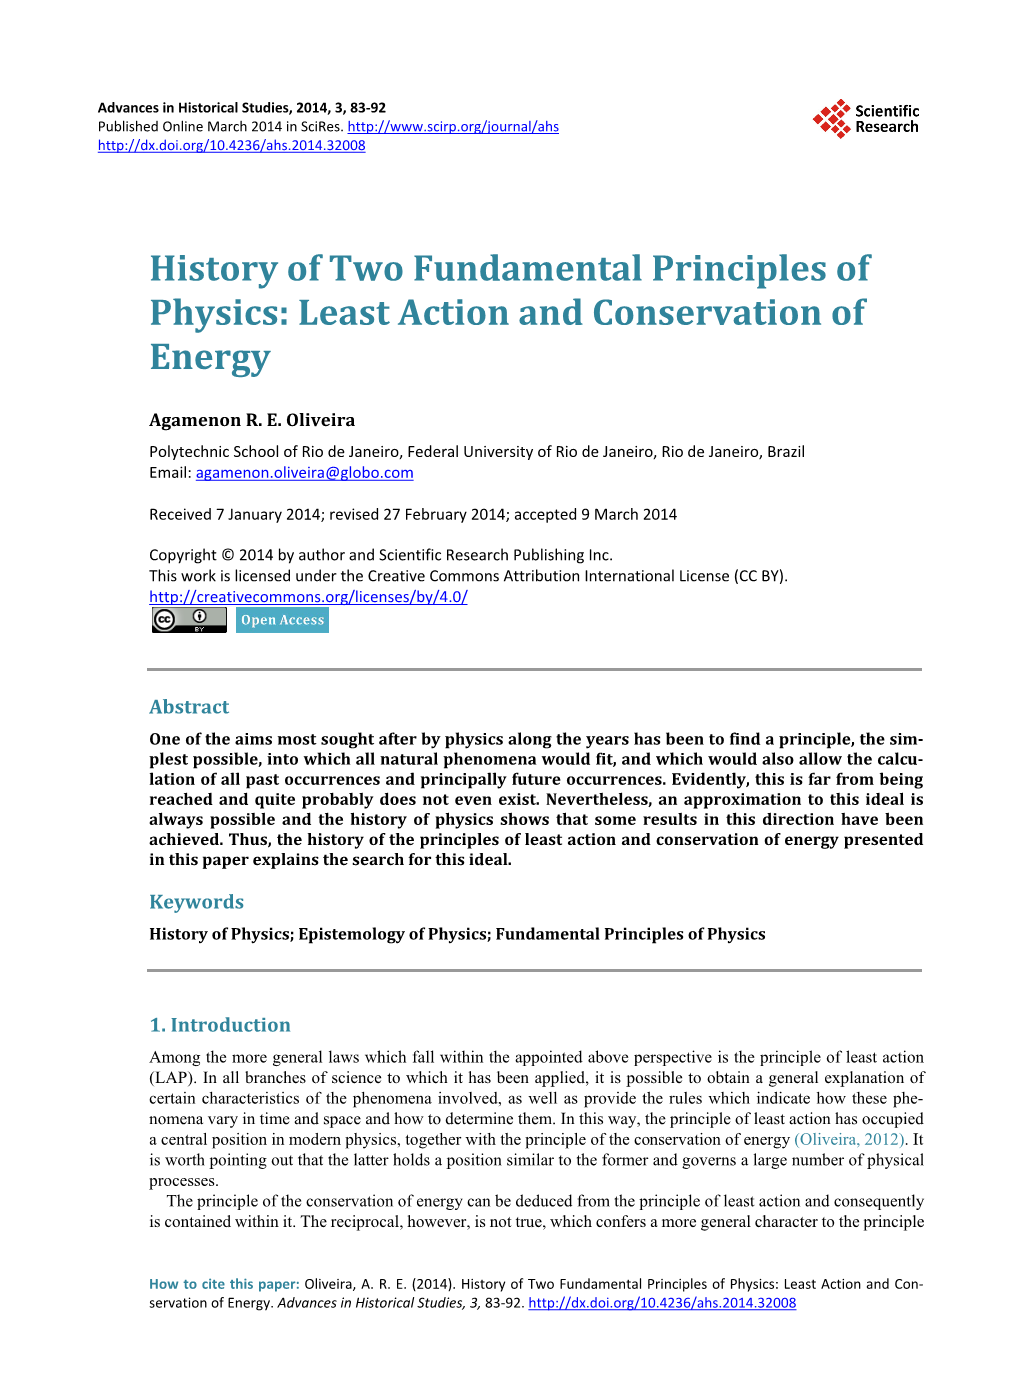 History of Two Fundamental Principles of Physics: Least Action and Conservation of Energy